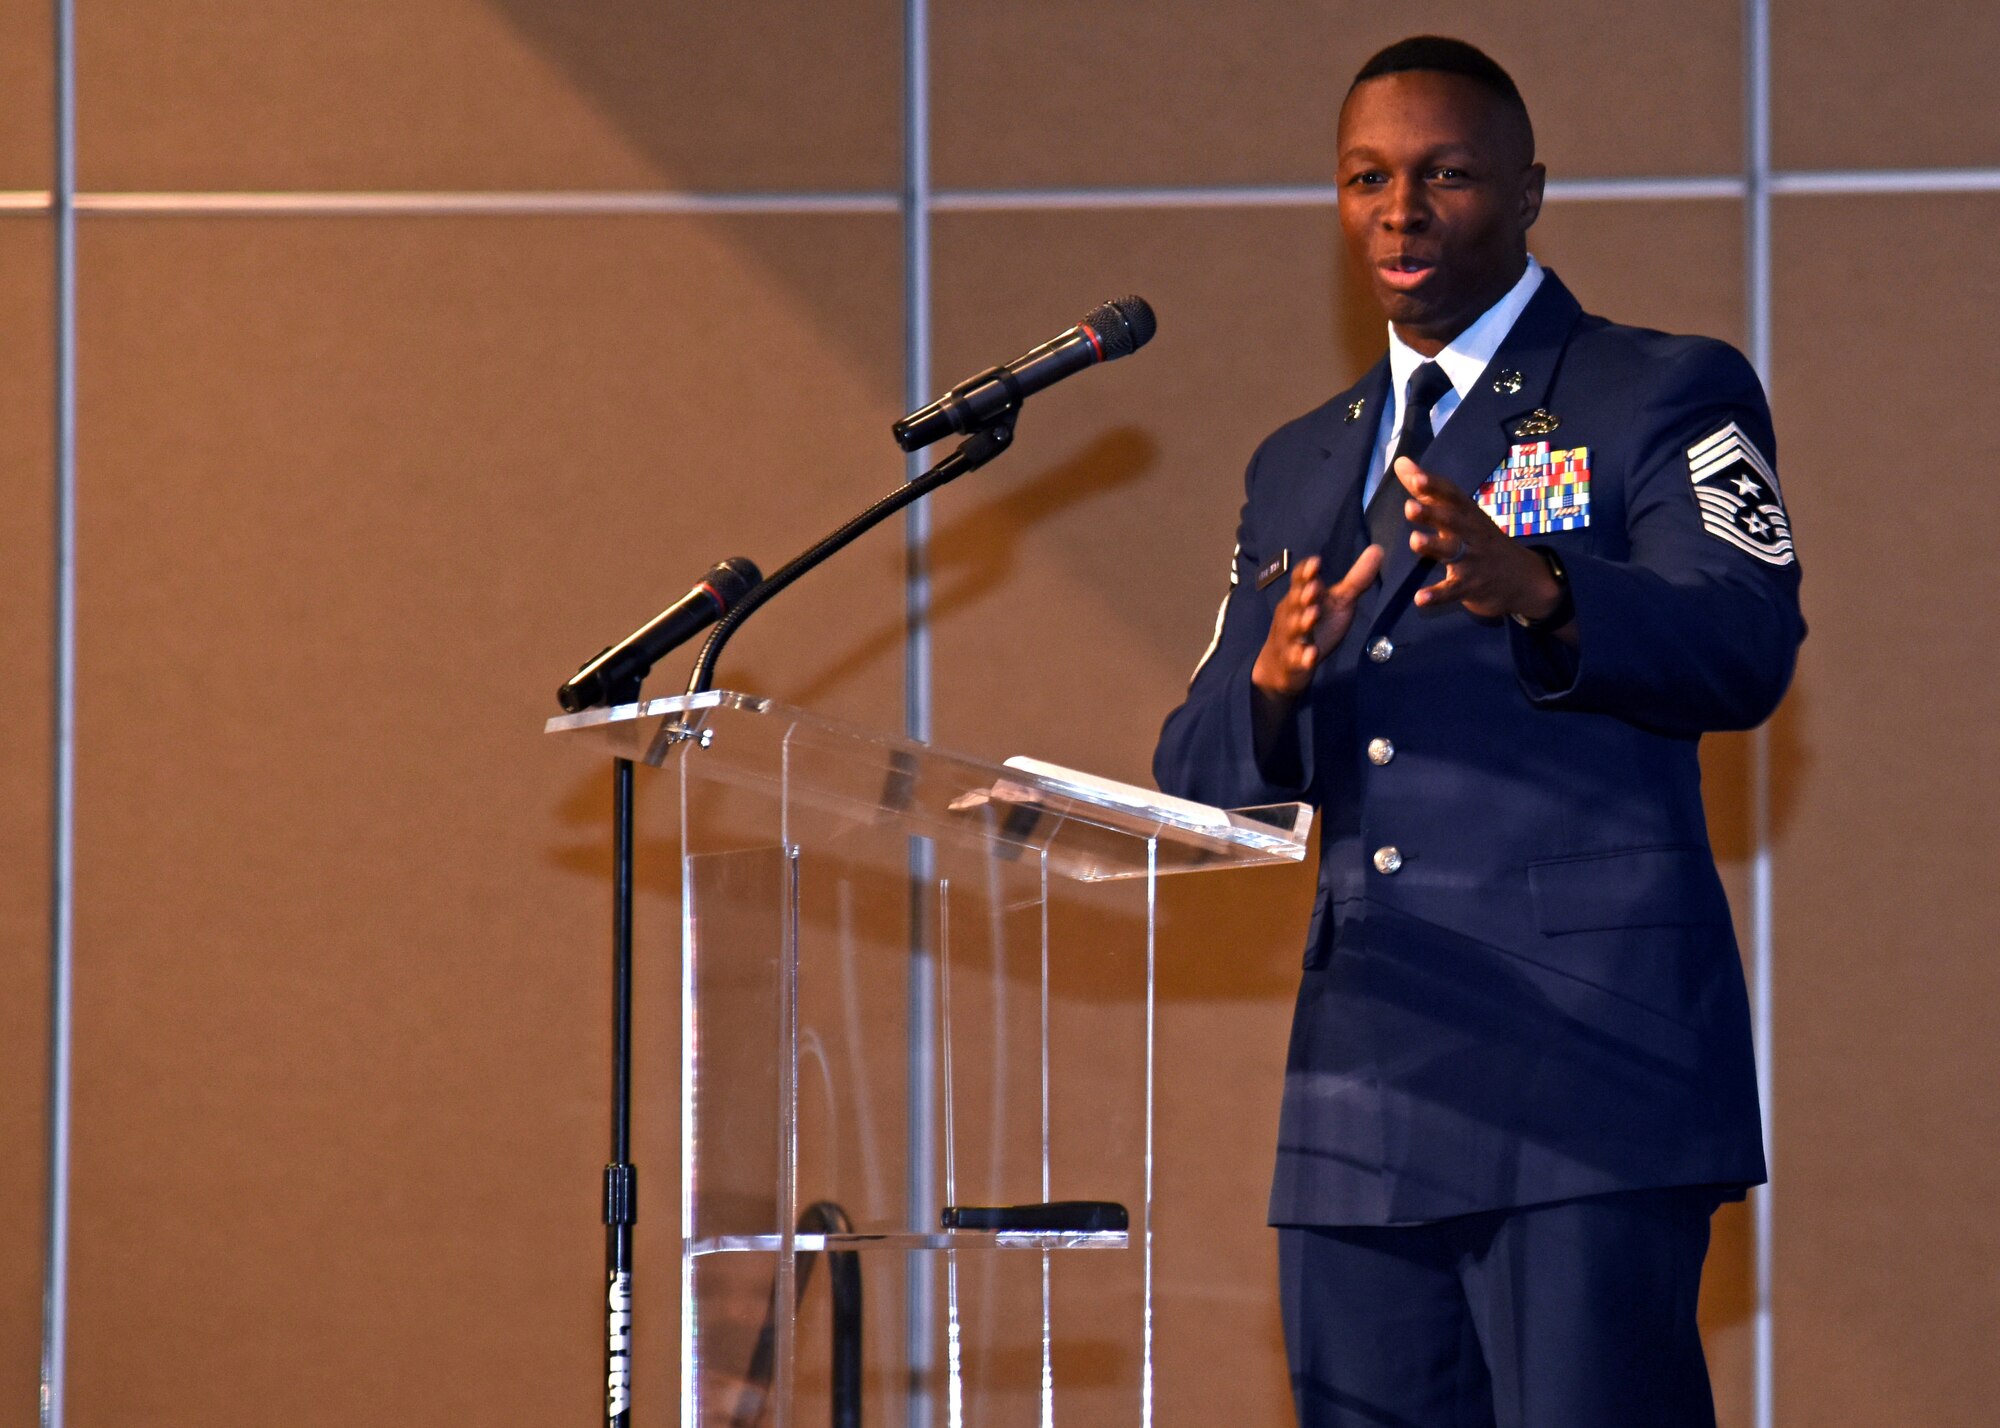 U.S. Air Force Chief Master Sgt. Lavor Kirkpatrick, 17th Training Wing command chief, speaks to the 20 selectees of the 20 Under 40 San Angelo at the McNease Convention Center in San Angelo, Texas, December 5, 2019. 20 Under 40 San Angelo is a program created to recognize 20 people under the age of 40 that are influential members of the city. 
 (U.S. Air Force photo by Airman 1st Class Ethan Sherwood)